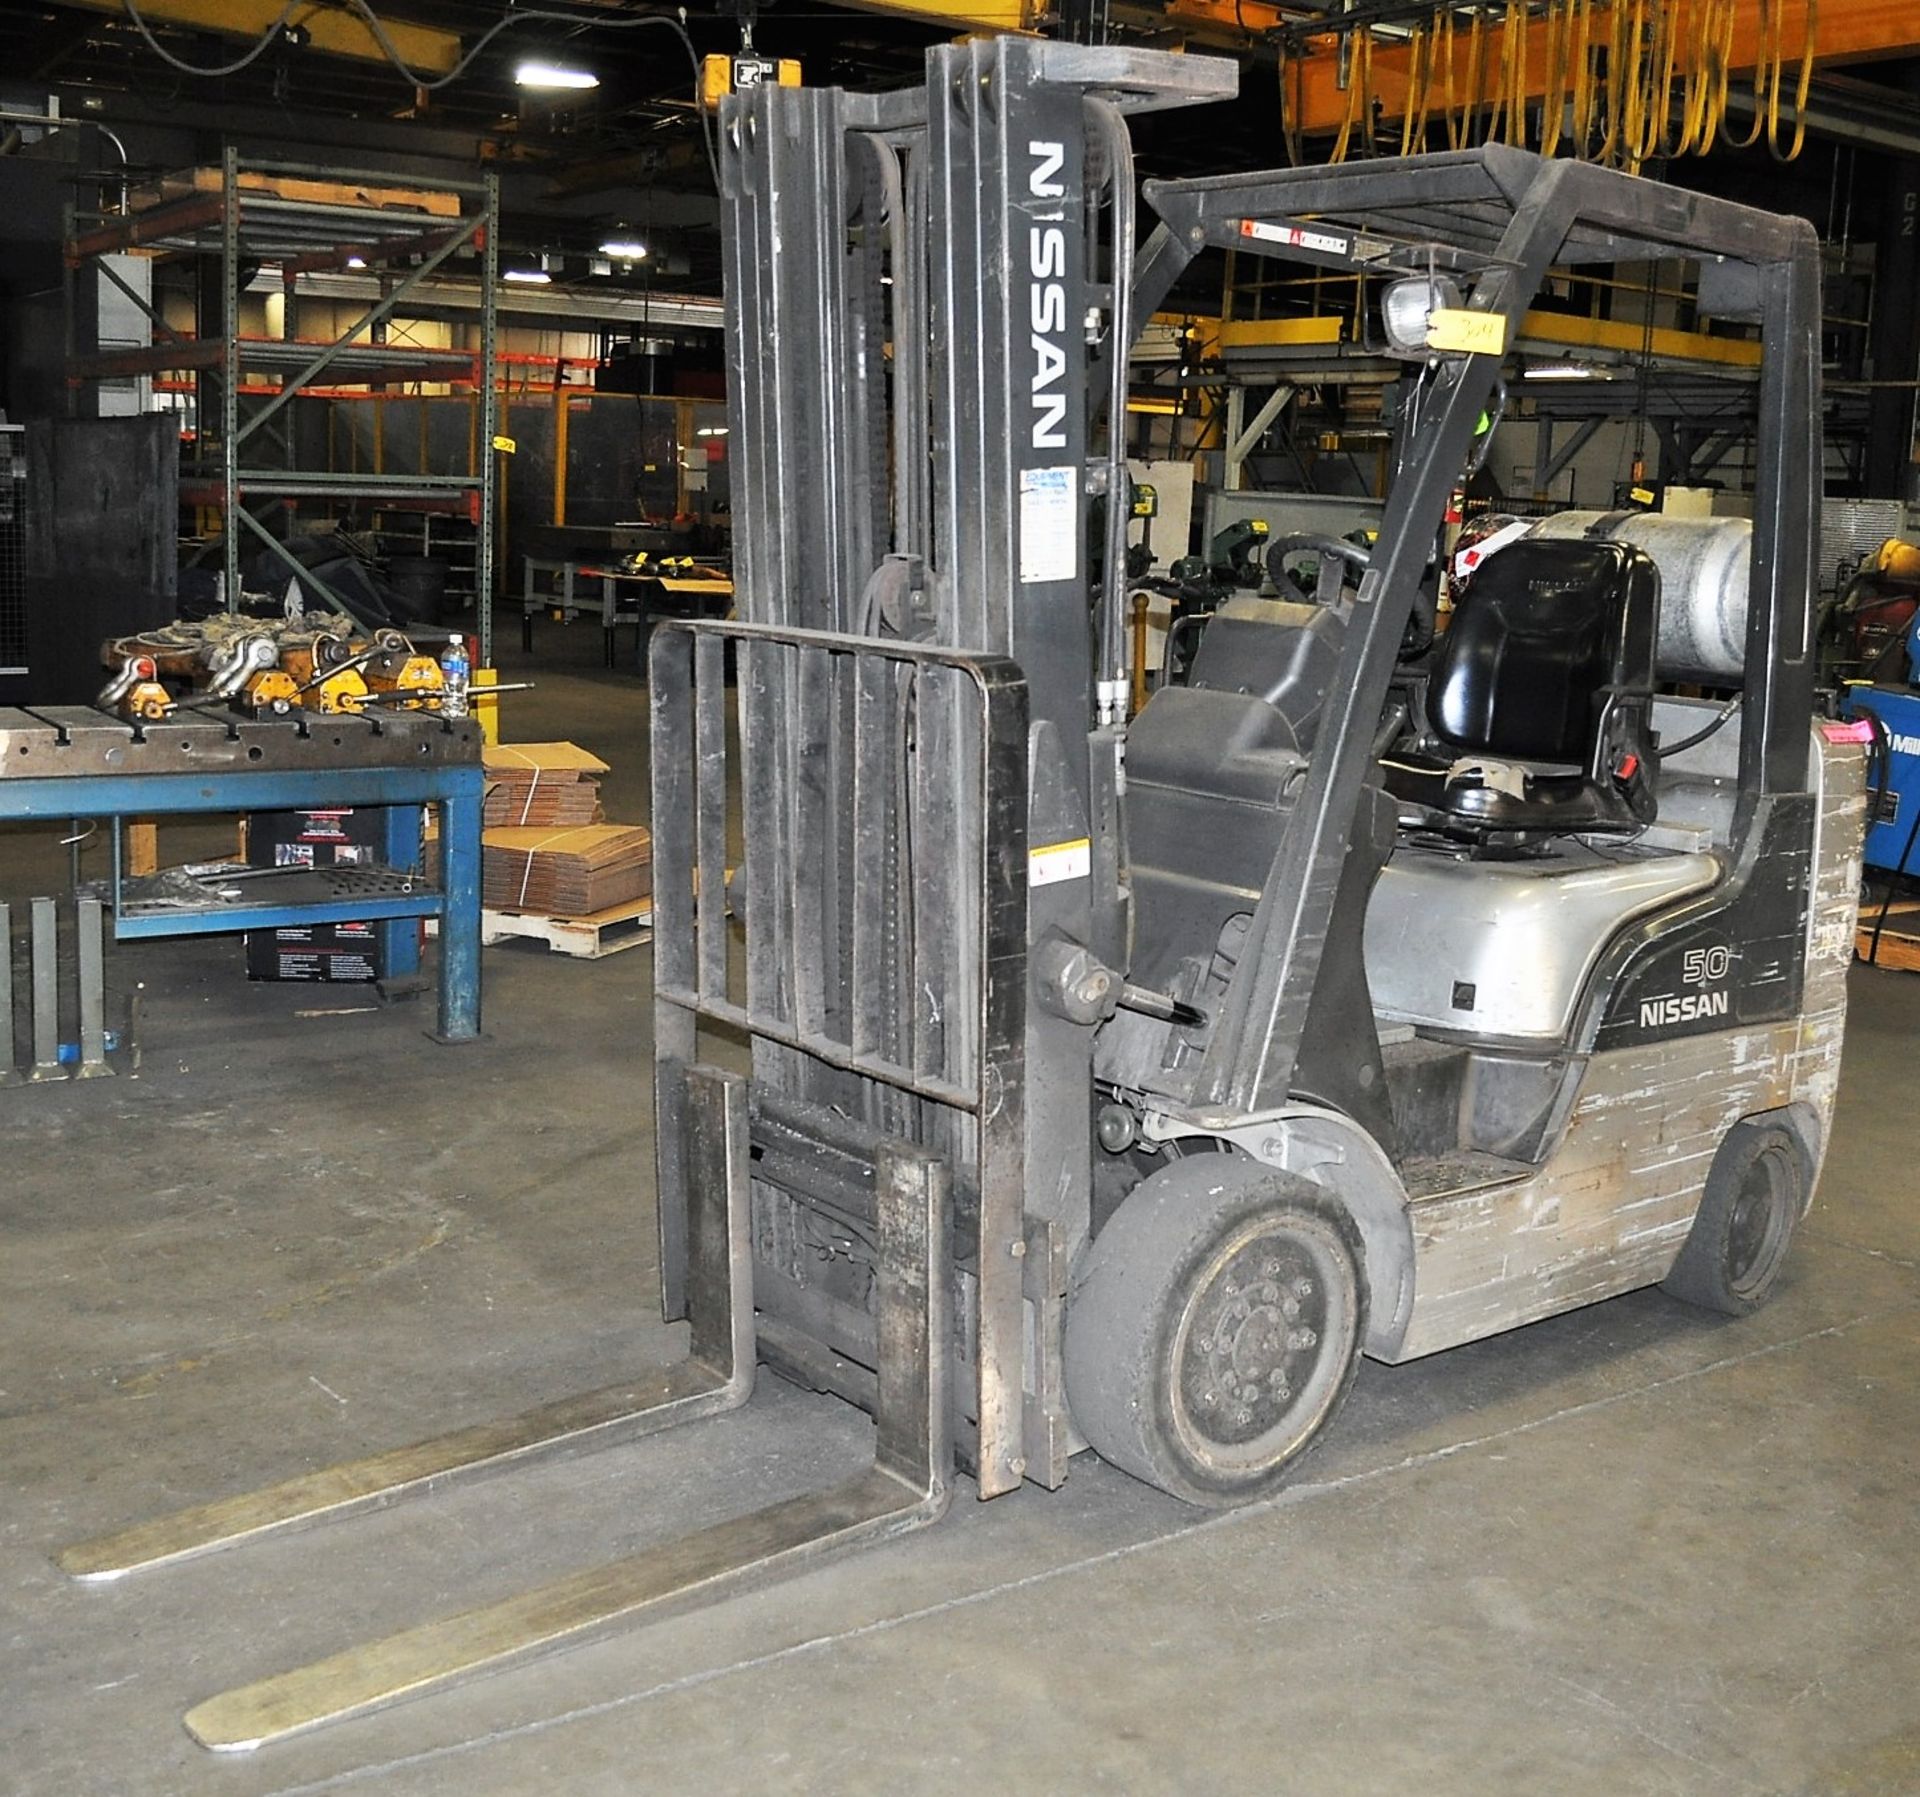 NISSAN MDL. MCPL02A25LV 3150# CAPACITY PROPANE FORKLIFT TRUCK, WITH 187" LIFT, SOLID TIRES, SIDE